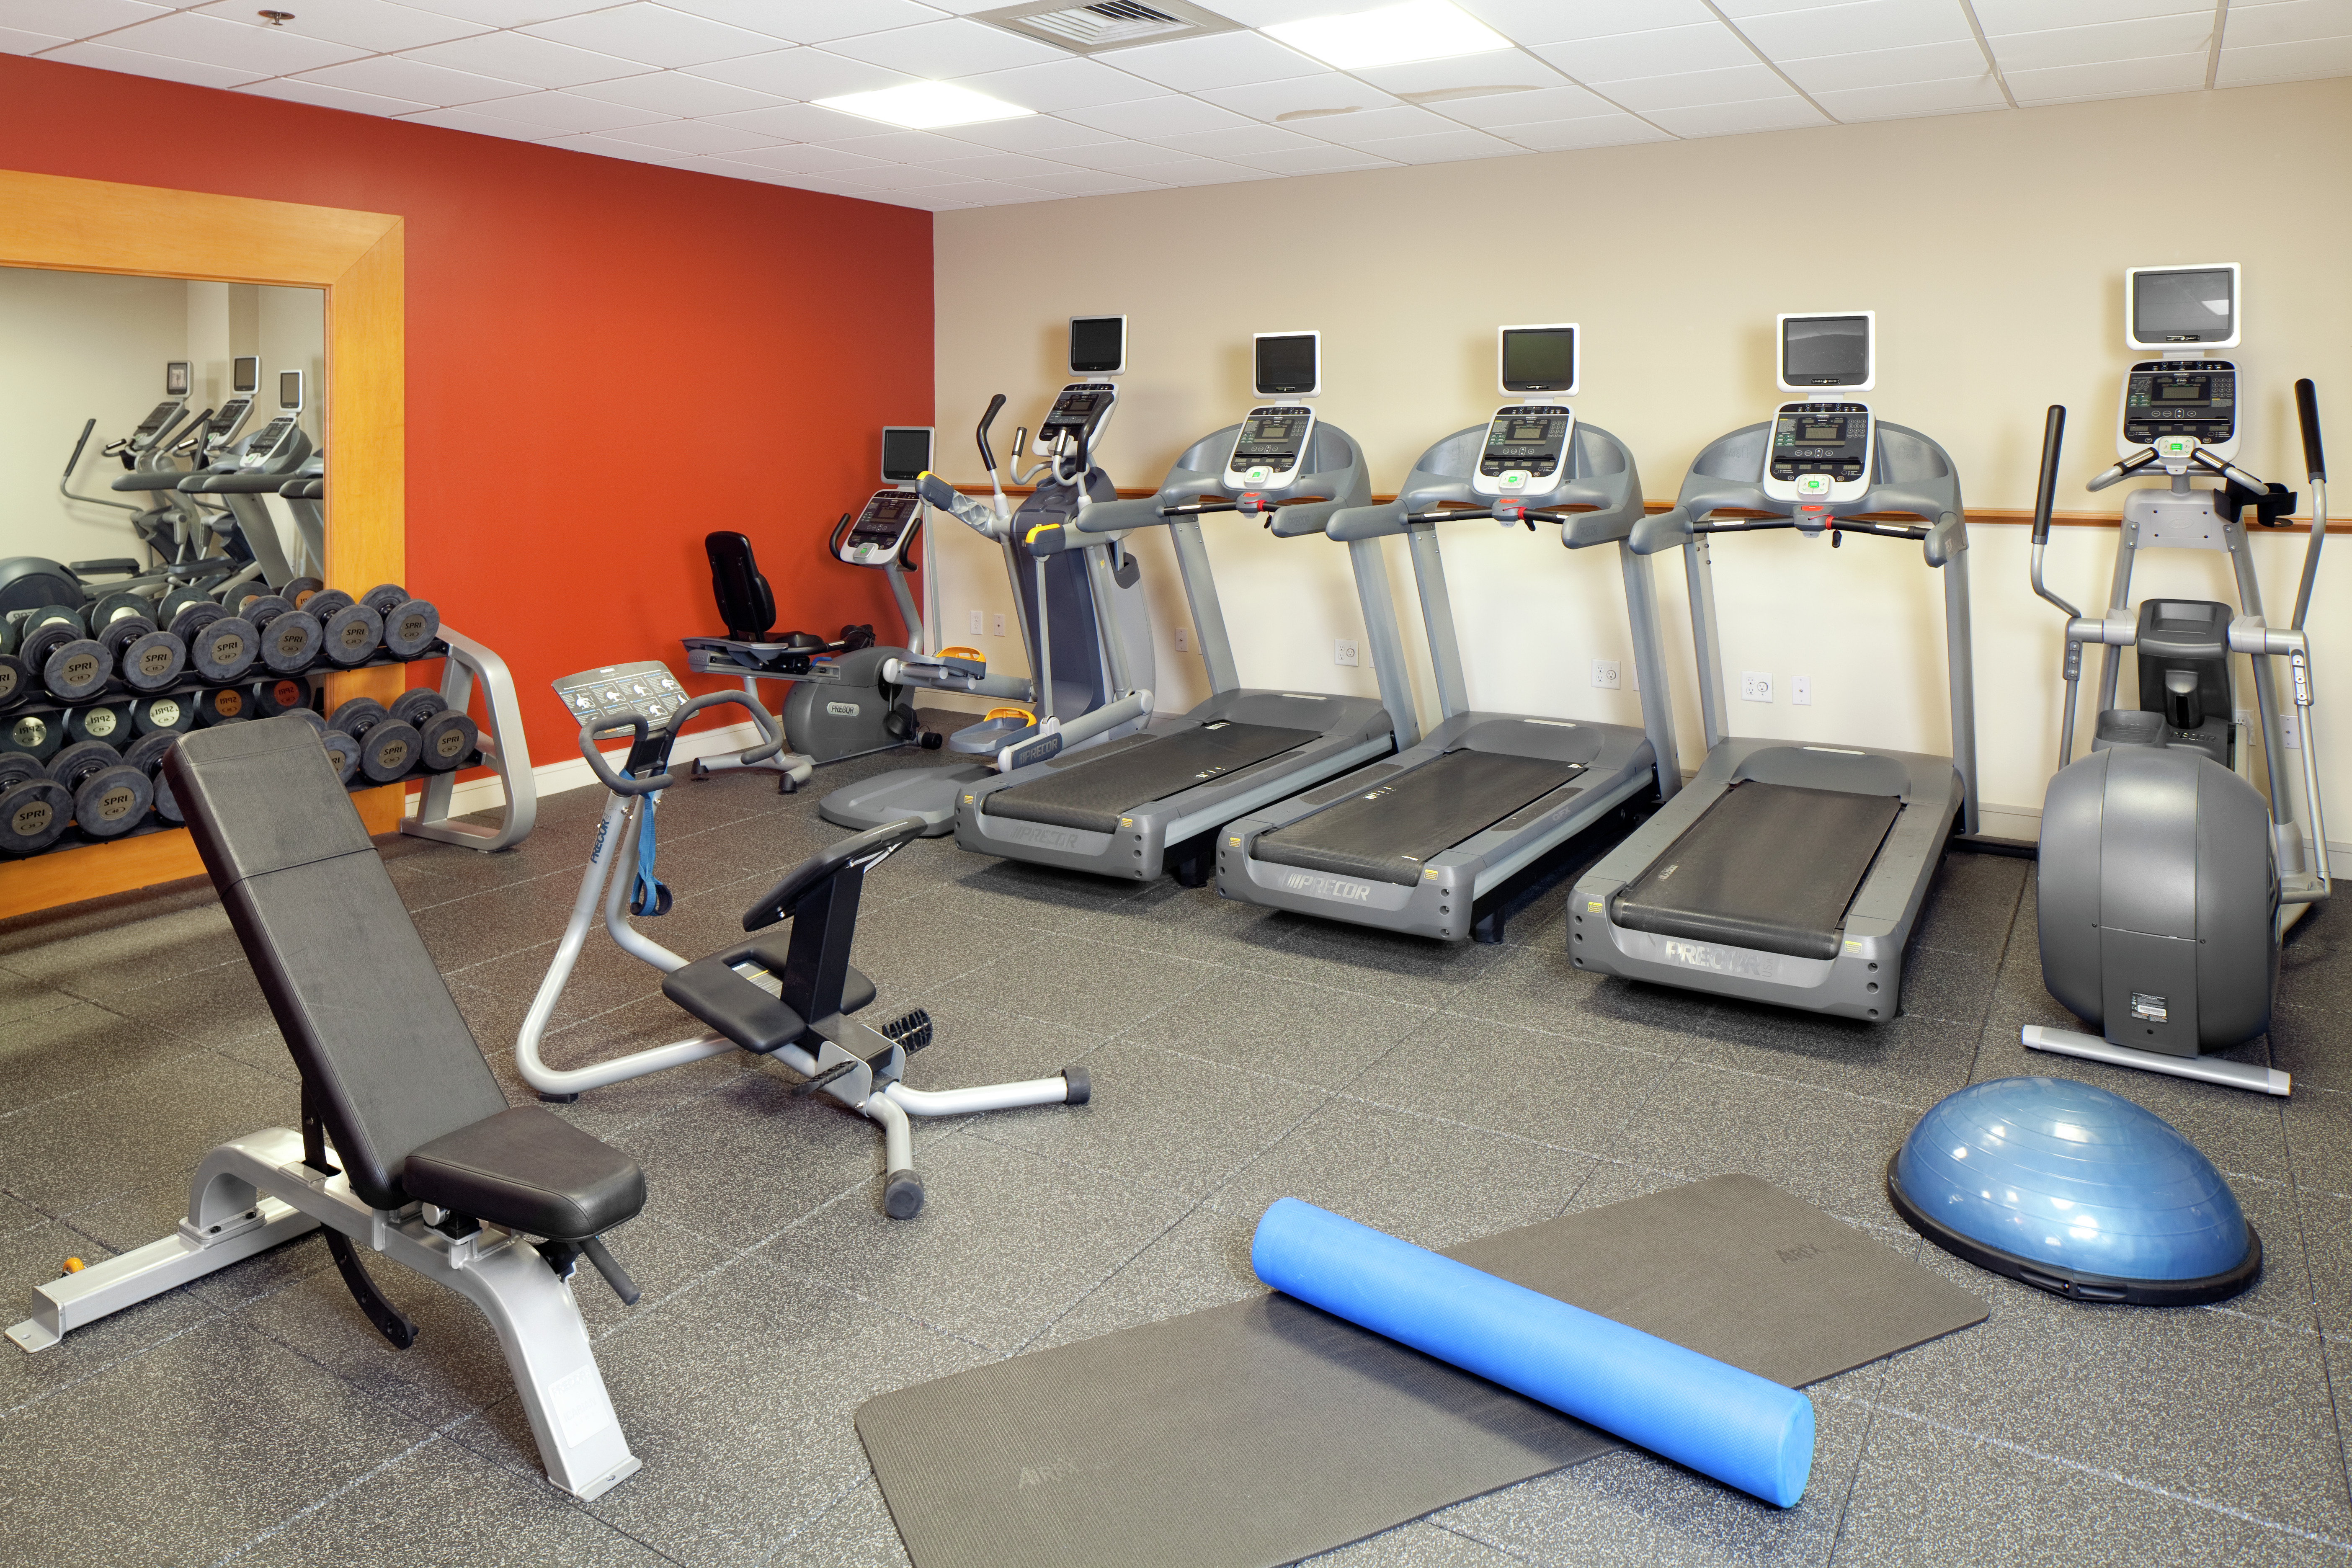 Fitness Center With Floor Mats, Weight Bench, Large Mirror, Free Weights, and Cardio Equipment